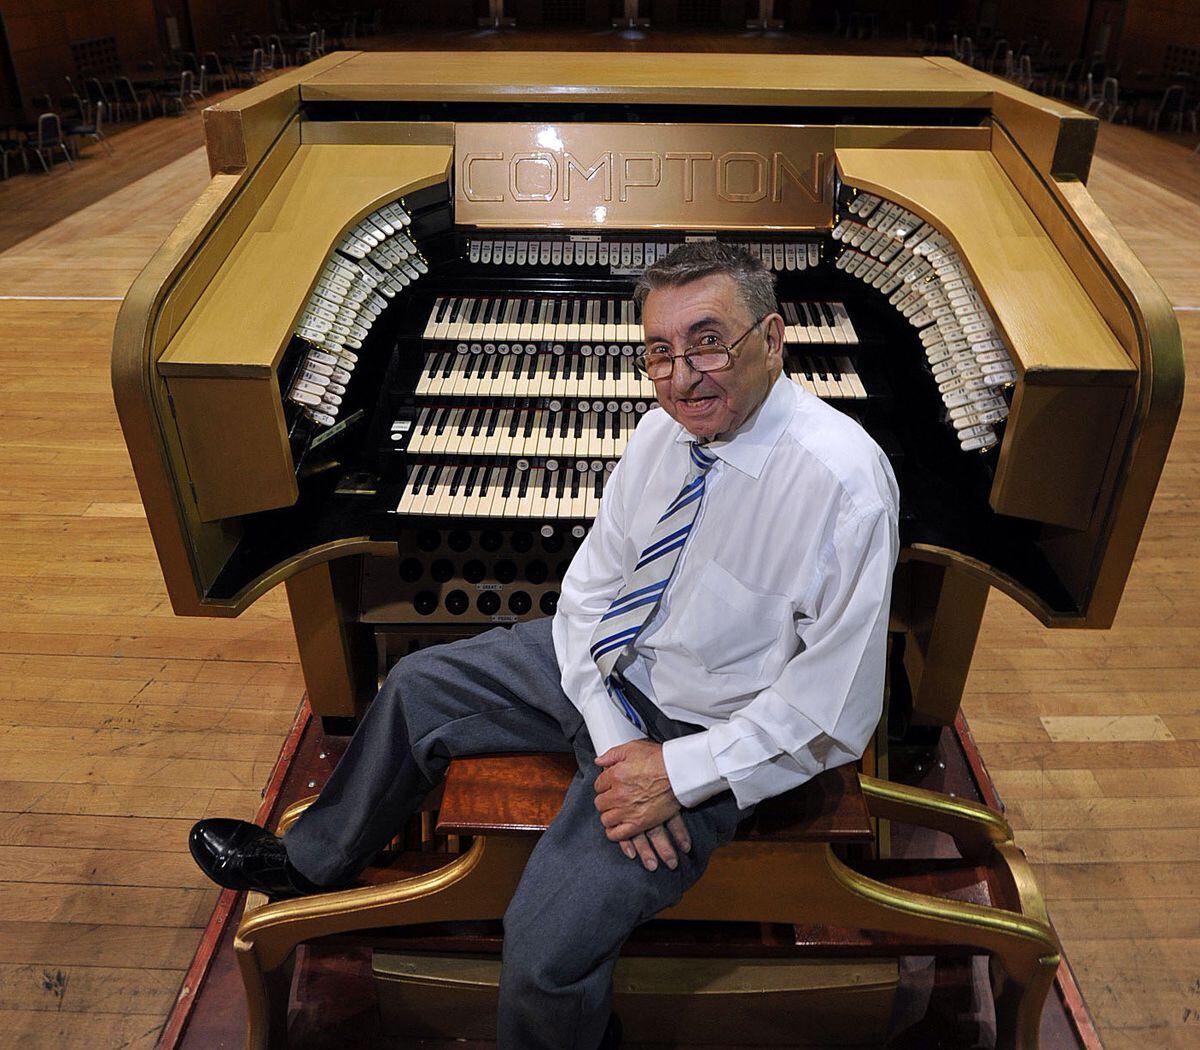 City organist Steve Tovey pictured with the organ console back in 2012